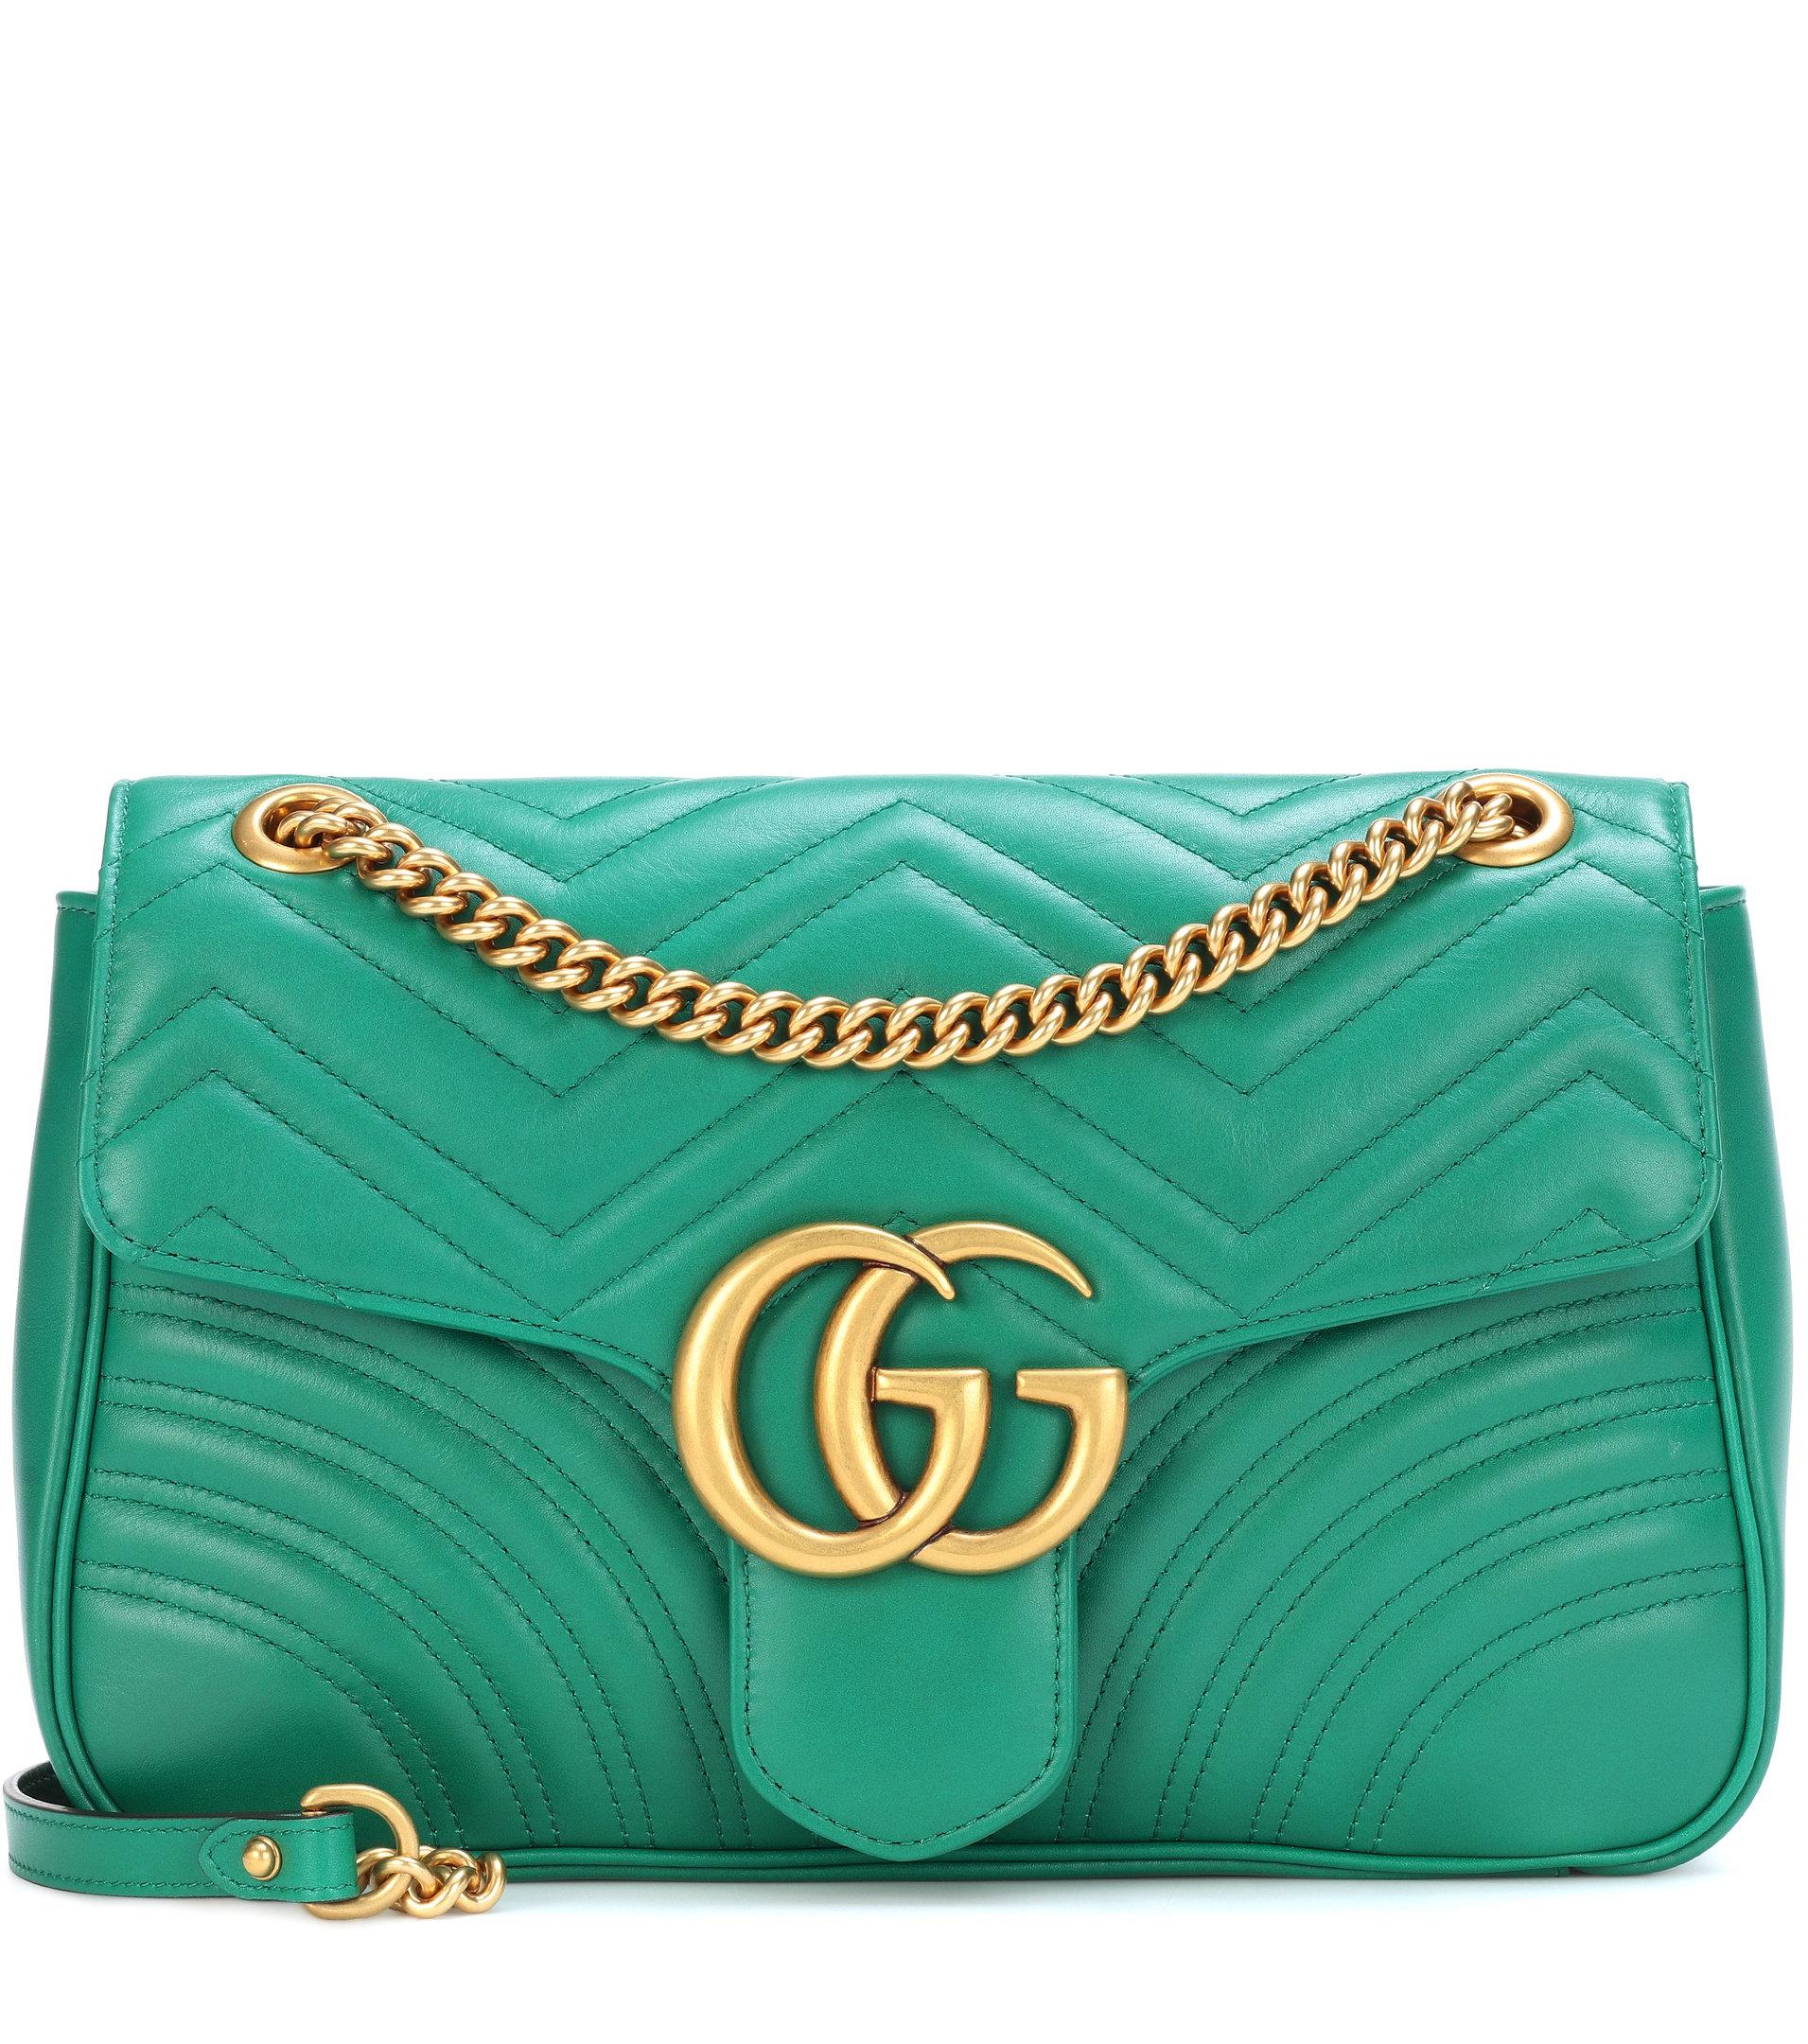 Gucci Gg Marmont Medium Leather Shoulder Bag in Green | Lyst